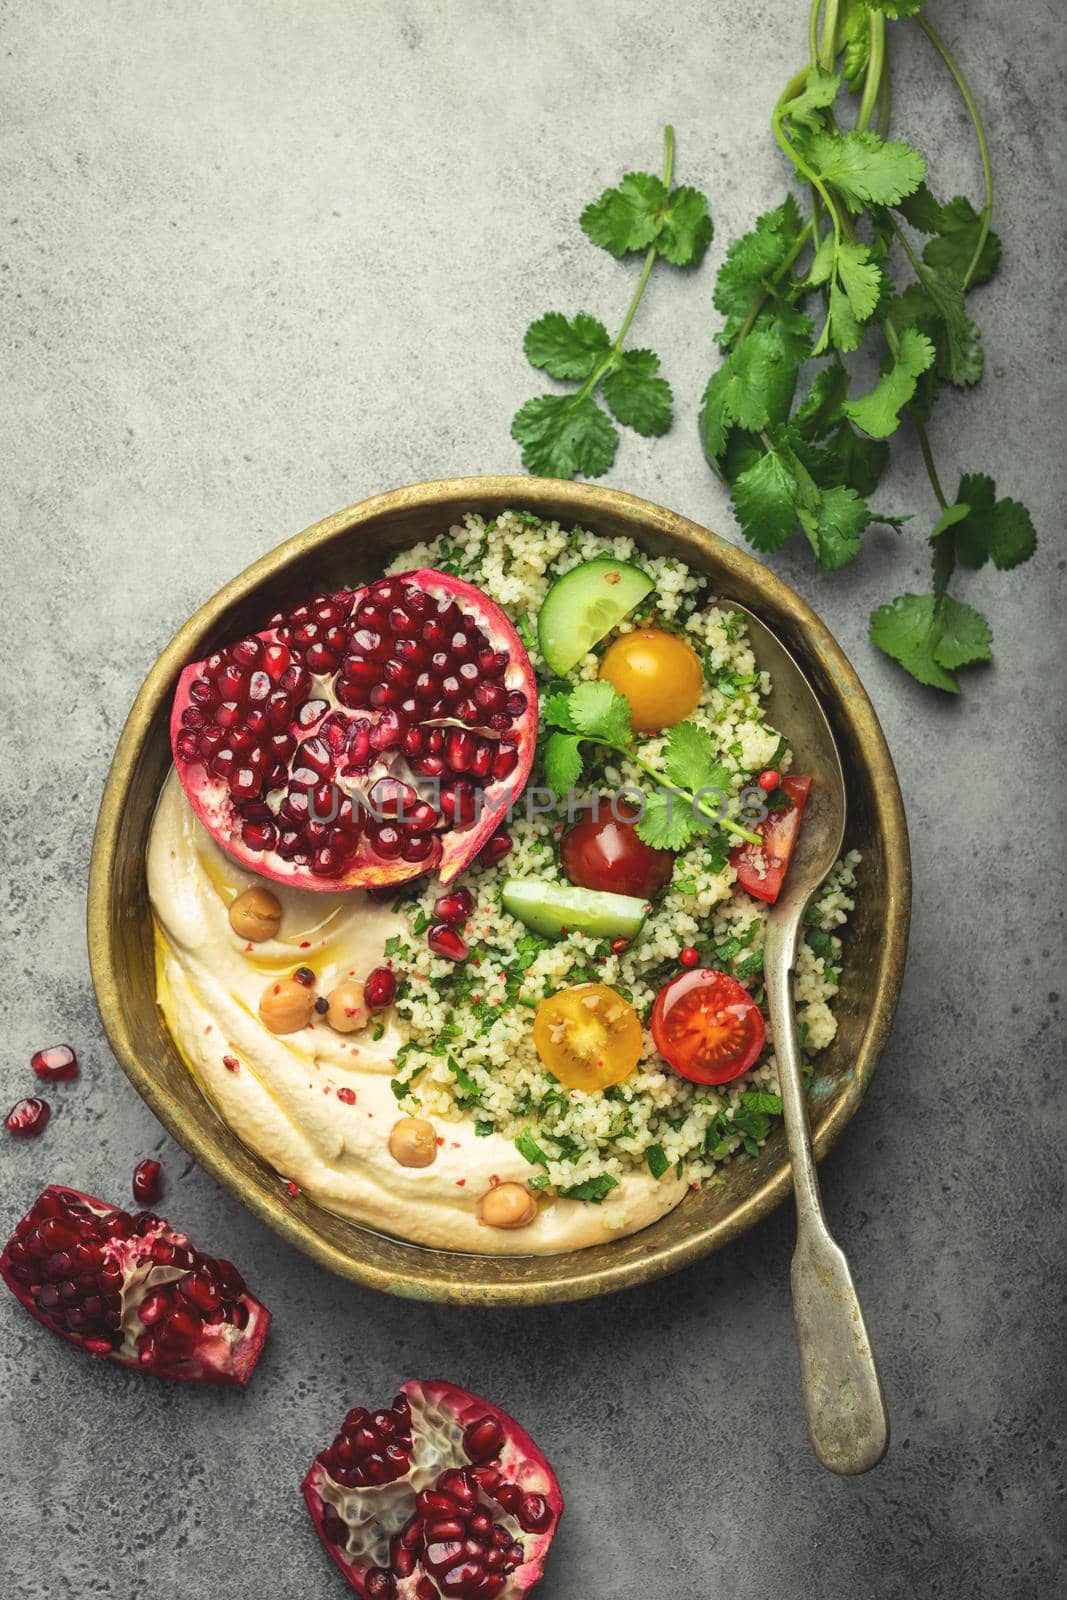 Rustic bowl with couscous salad with vegetables, hummus and fresh cut pomegranate. Middle eastern or Arab style meal with seasonings and fresh cilantro. Healthy Mediterranean dinner, toned image.